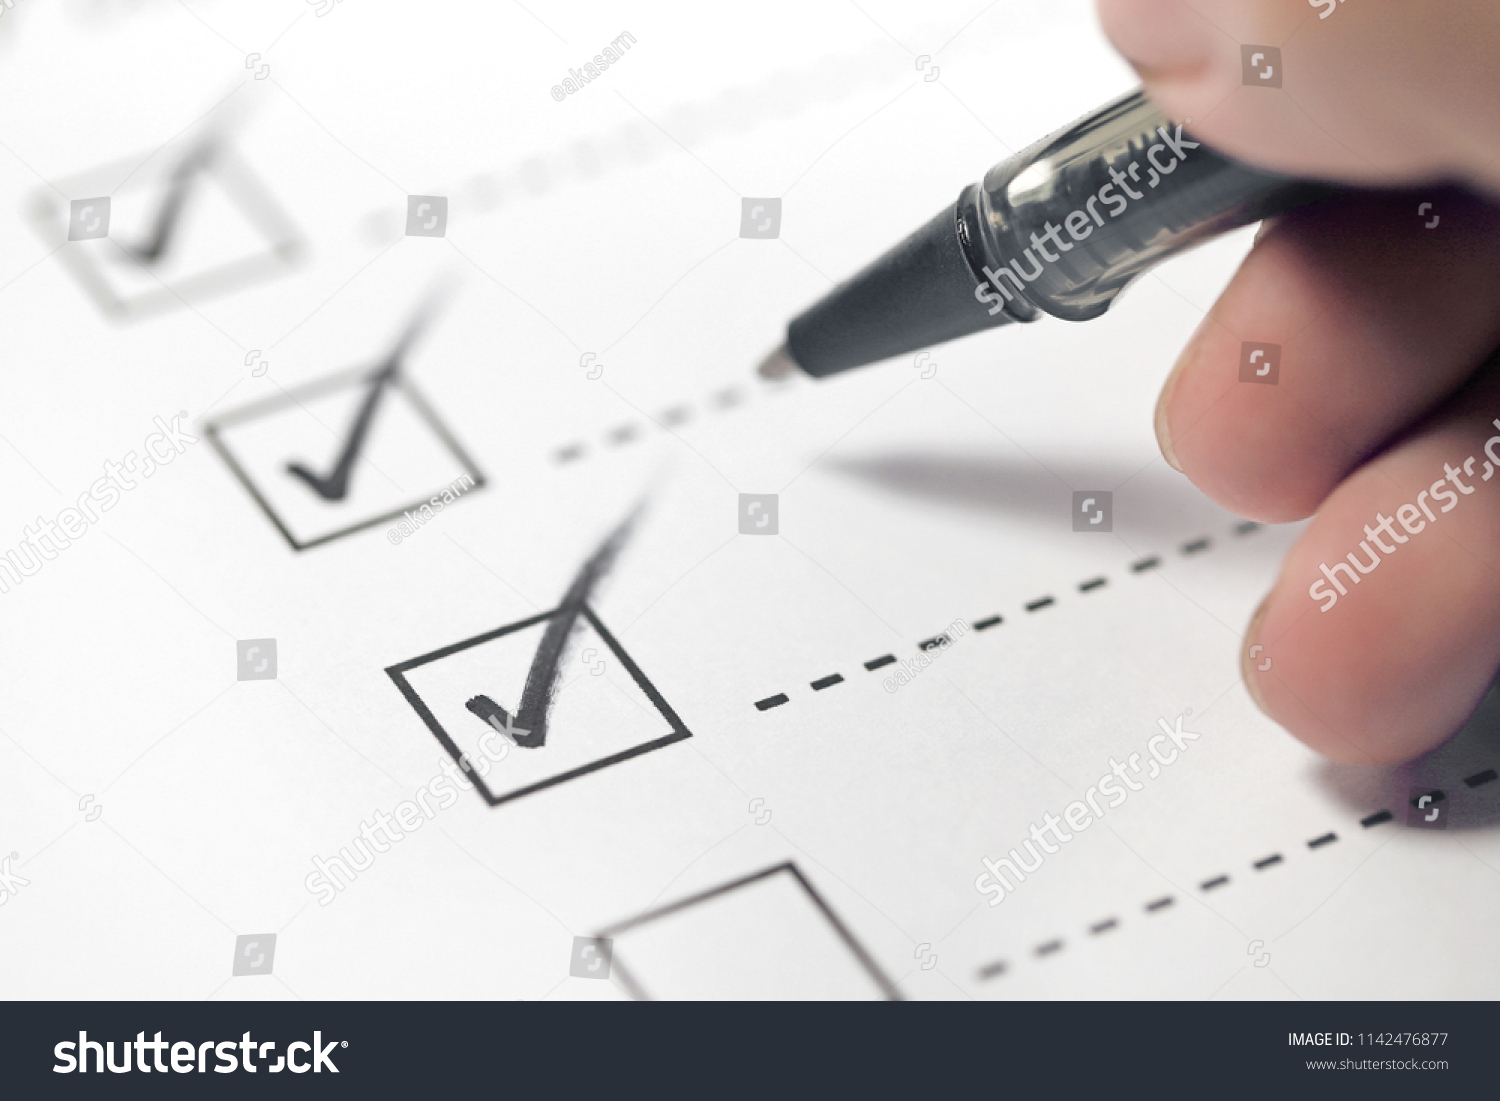 Hand with black pen marking on checklist box. #1142476877